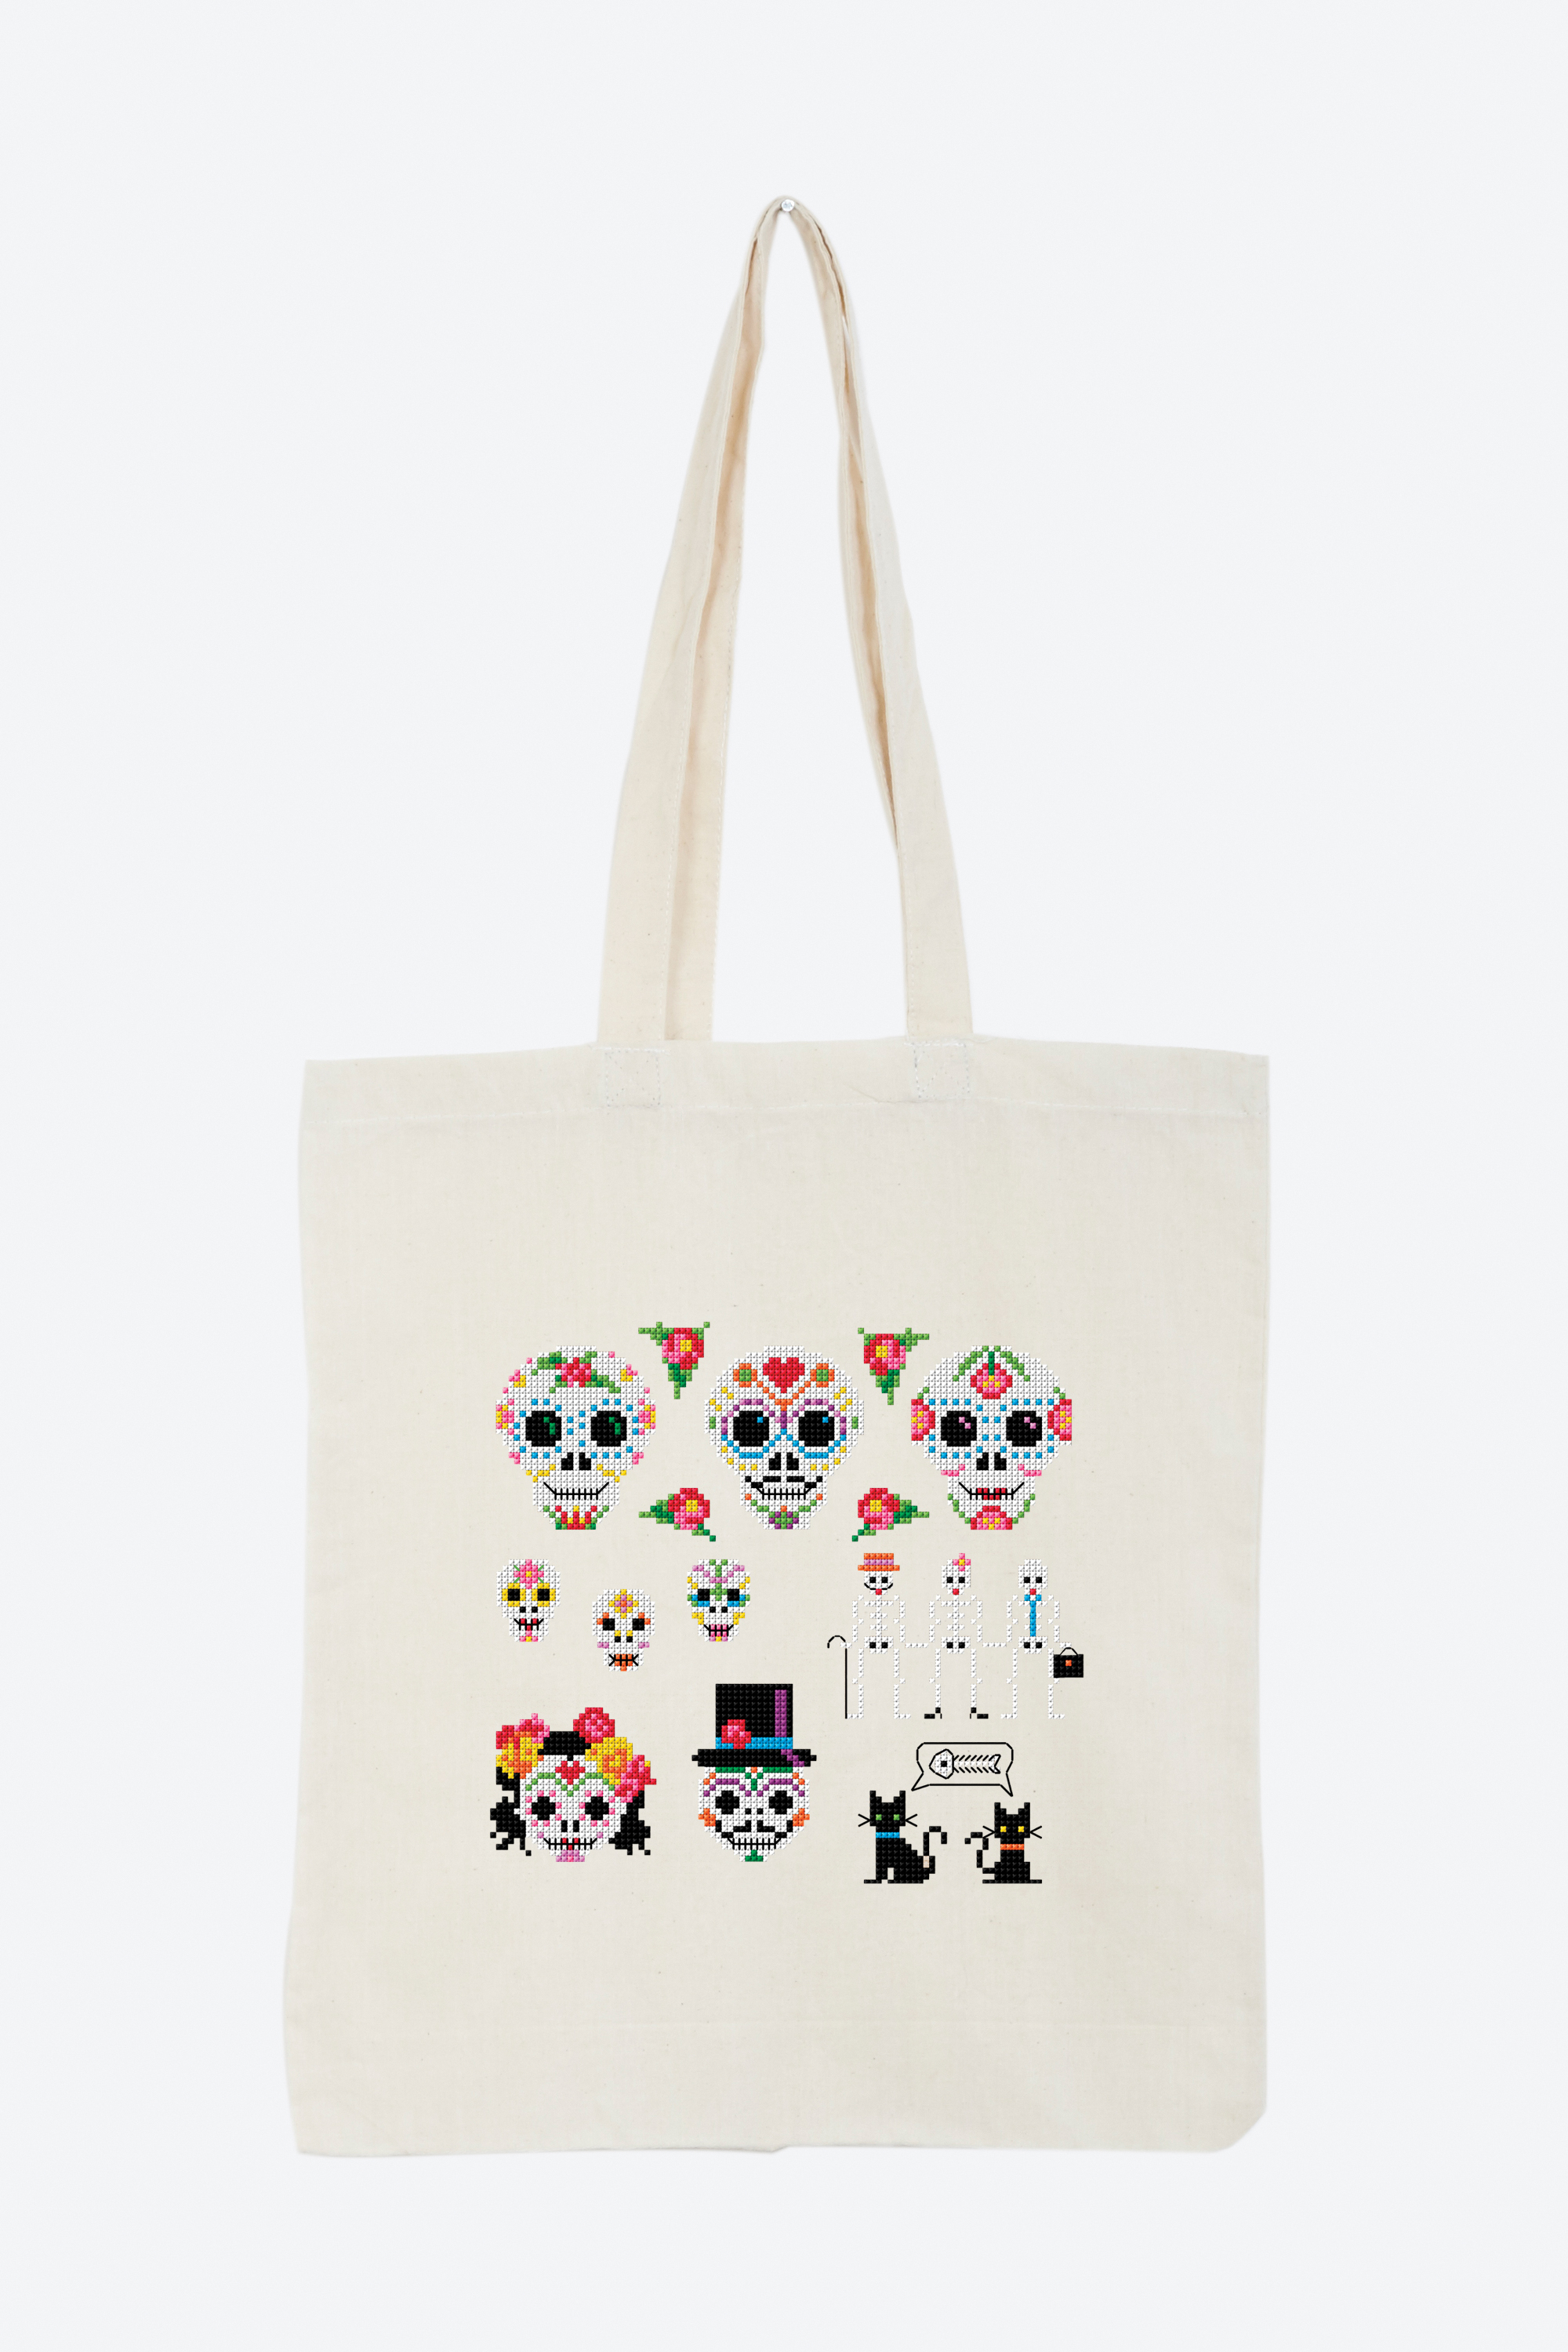 Day Of The Dead Embroidery Patterns Mexican Day Of The Dead Cross Stitch Pattern